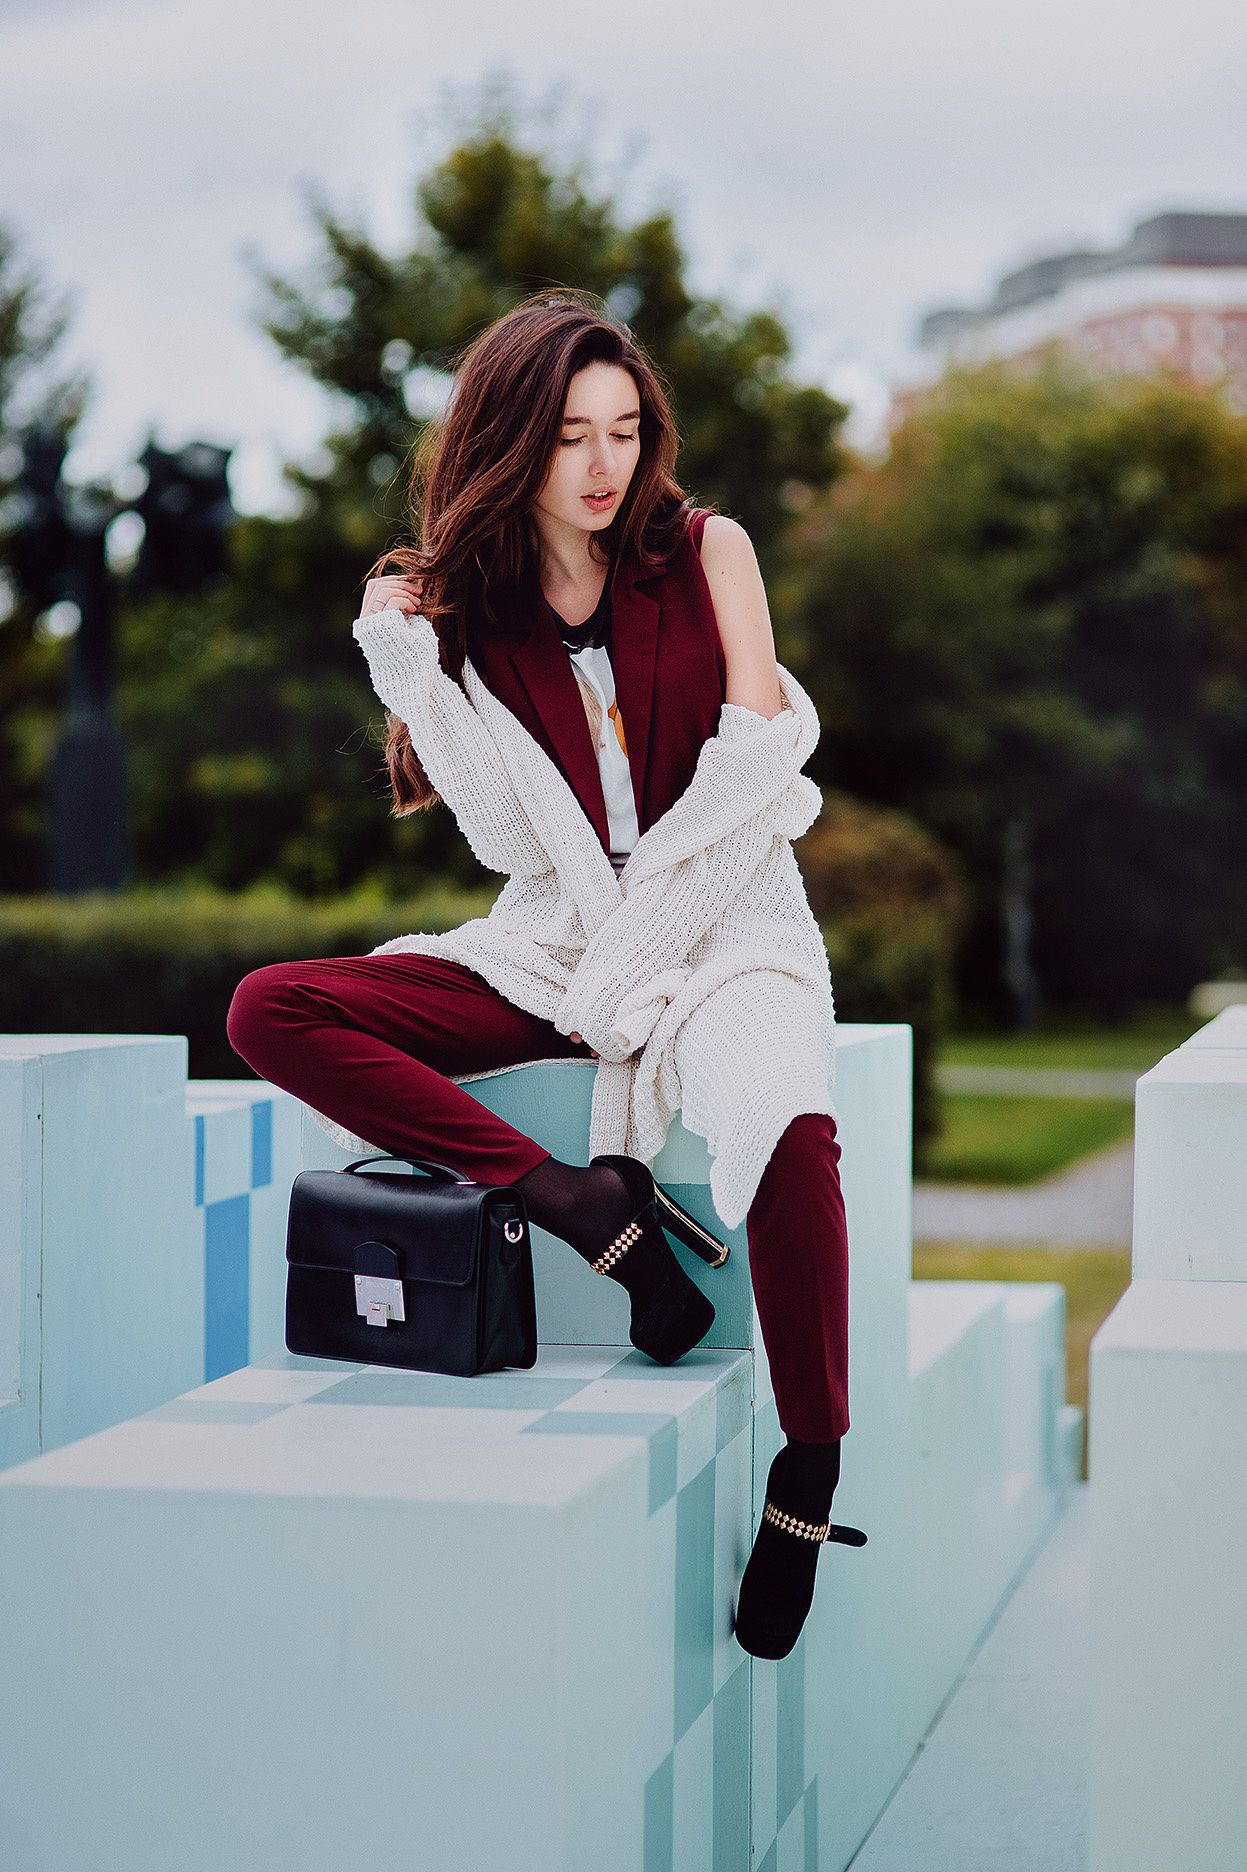 Women Brunette Long Hair Red Clothing White Clothing Shoes High Heels Hand Bags 3D Blocks Fashion 1247x1872